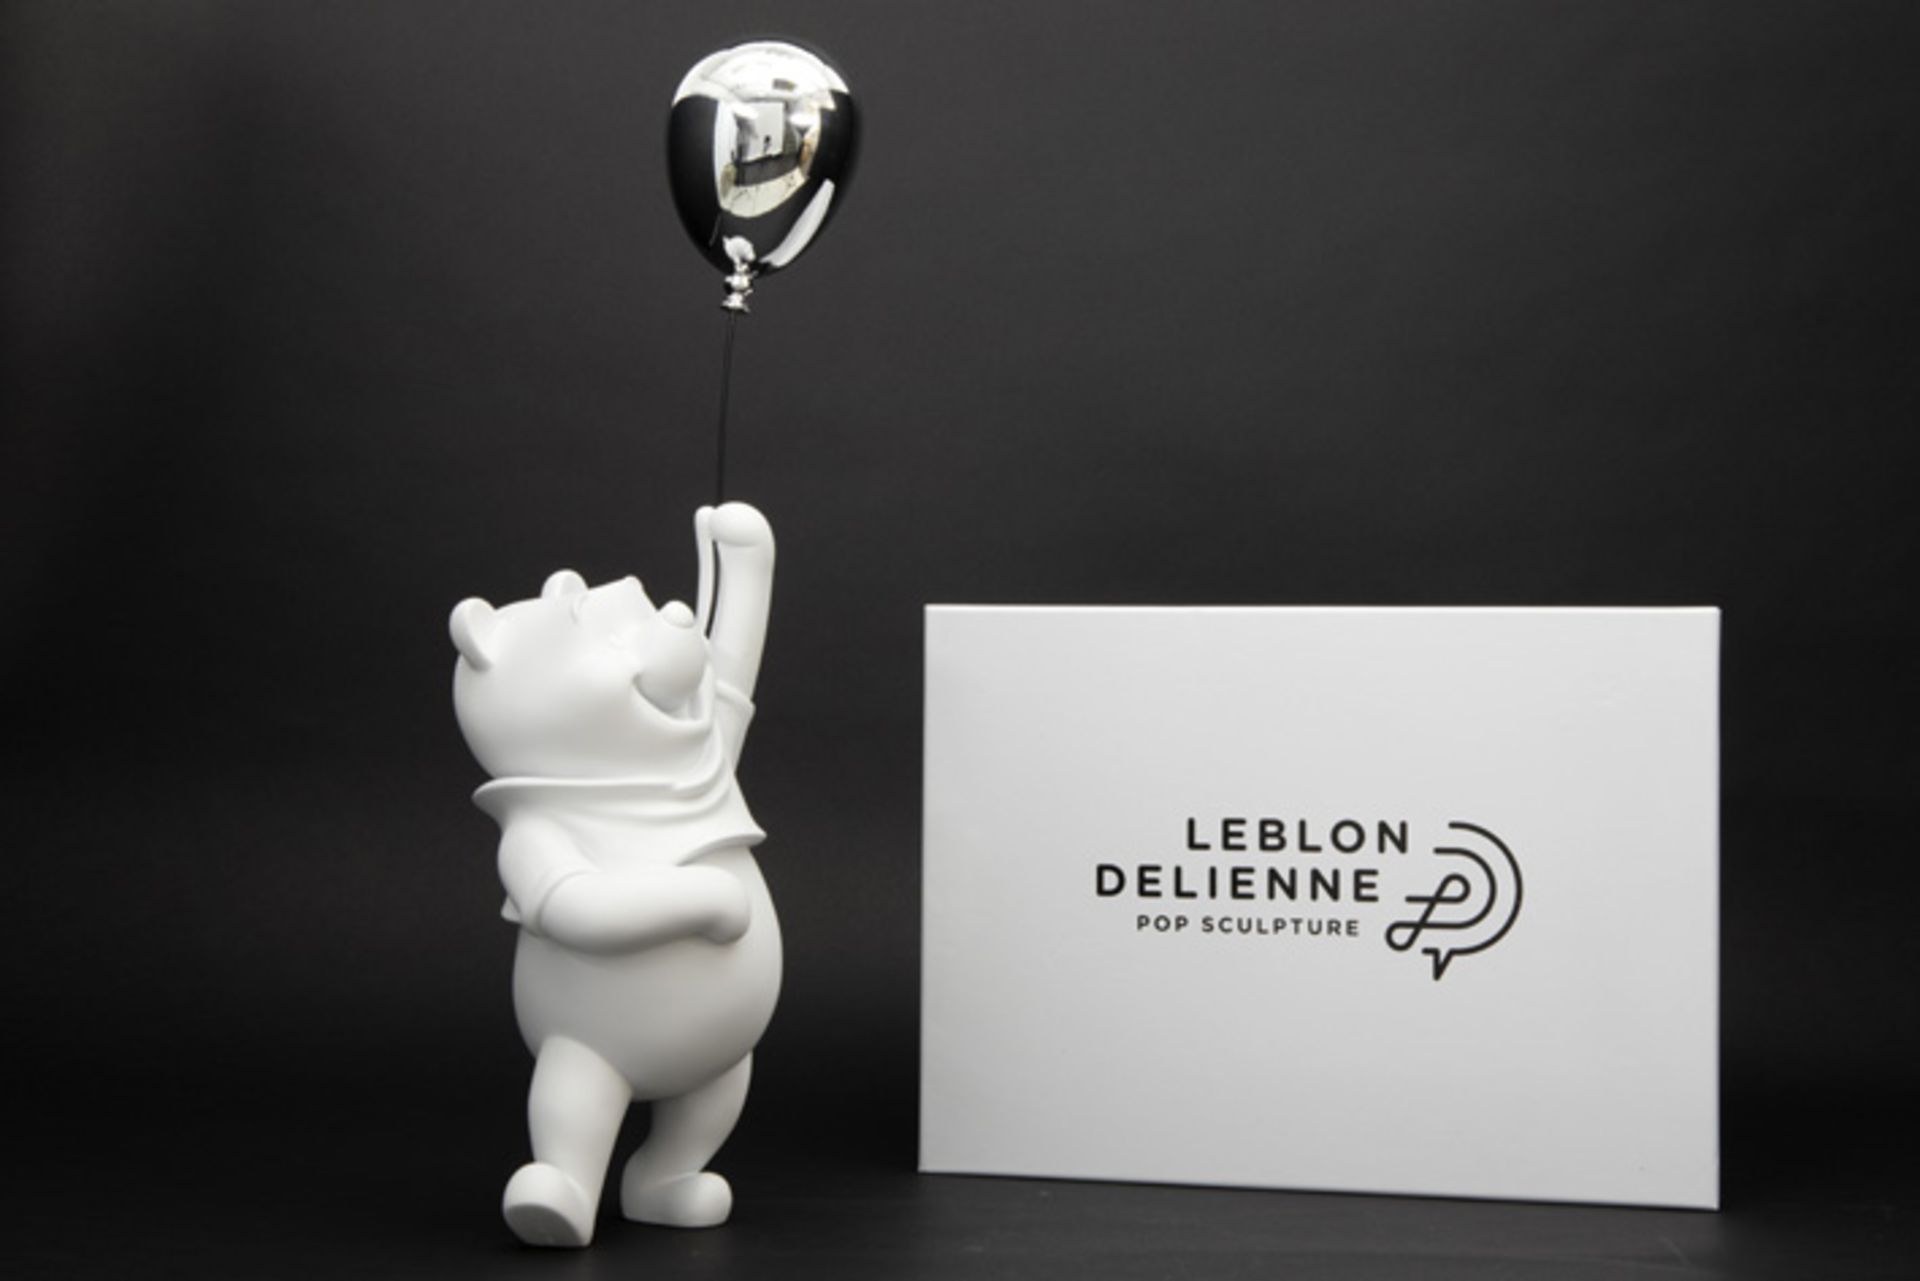 Leblon Delienne & Disney "Winnie the Pooh White and Silver" sculpture n° 10/500 after A.A. Milne - Image 3 of 3